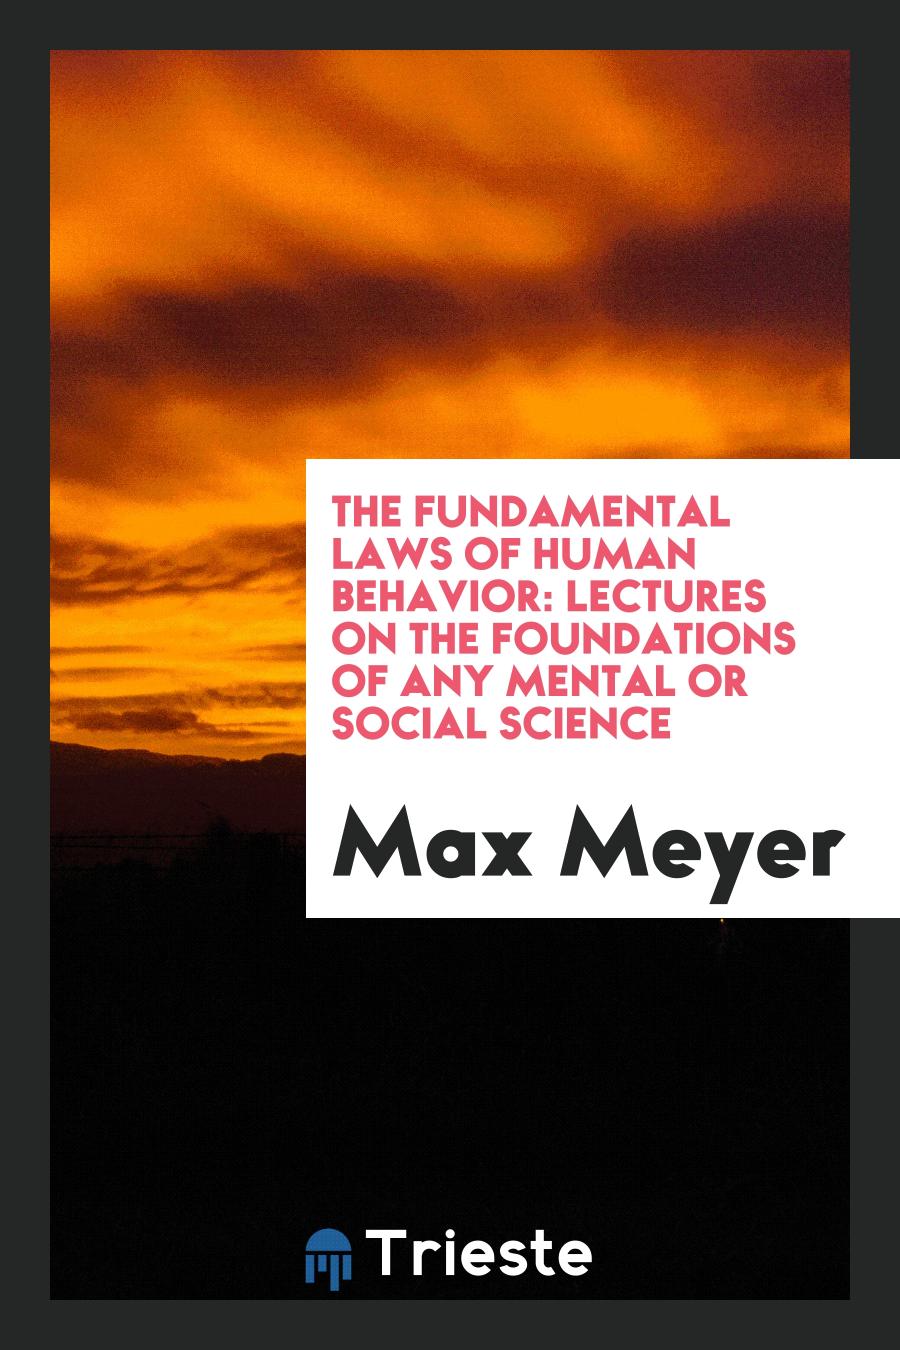 Max Meyer - The Fundamental Laws of Human Behavior: Lectures on the Foundations of Any Mental or Social Science